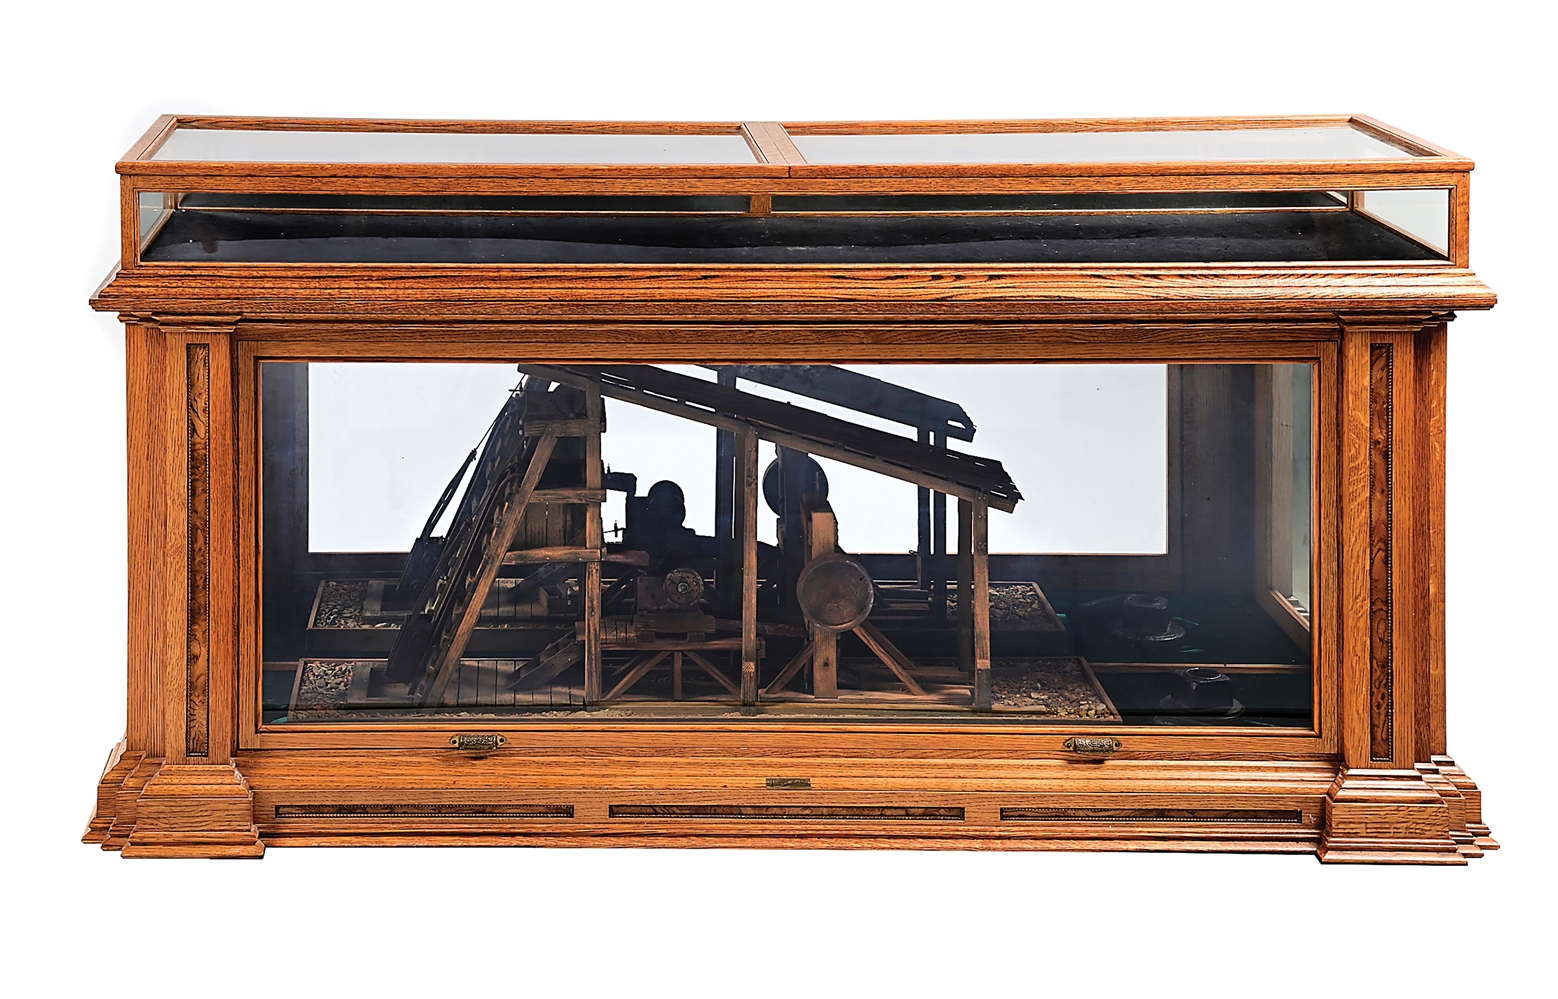 FAIRBANKS & CO. 2-PIECE OAK WOOD MINING DISPLAY CASE WITH WOODEN MODEL FROM CALIFORNIA MINE.